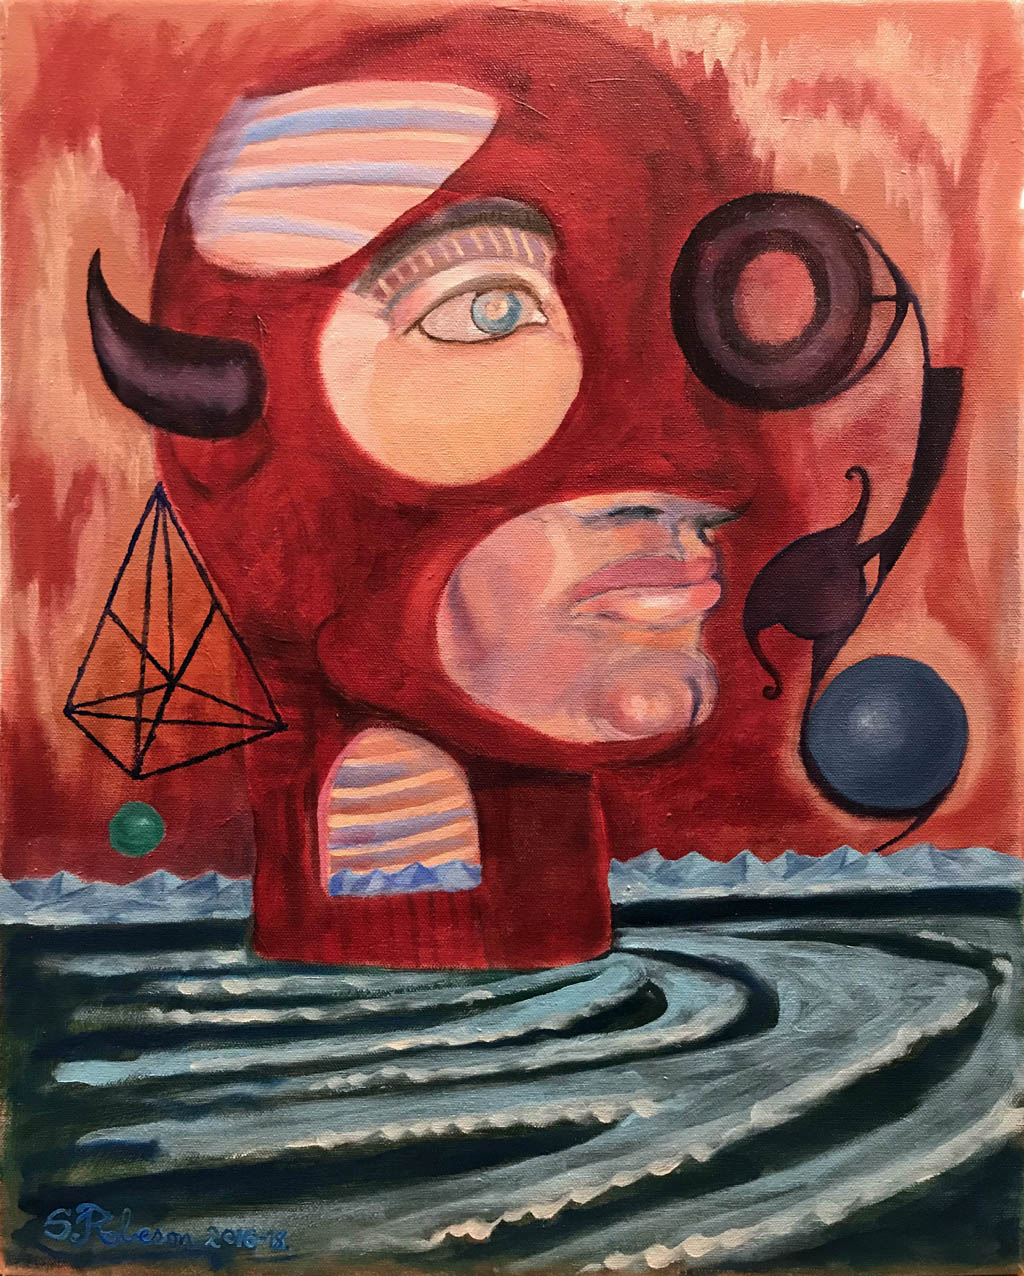 Stephen Robeson Miller - The Prime of Life - 2018 oil on canvas